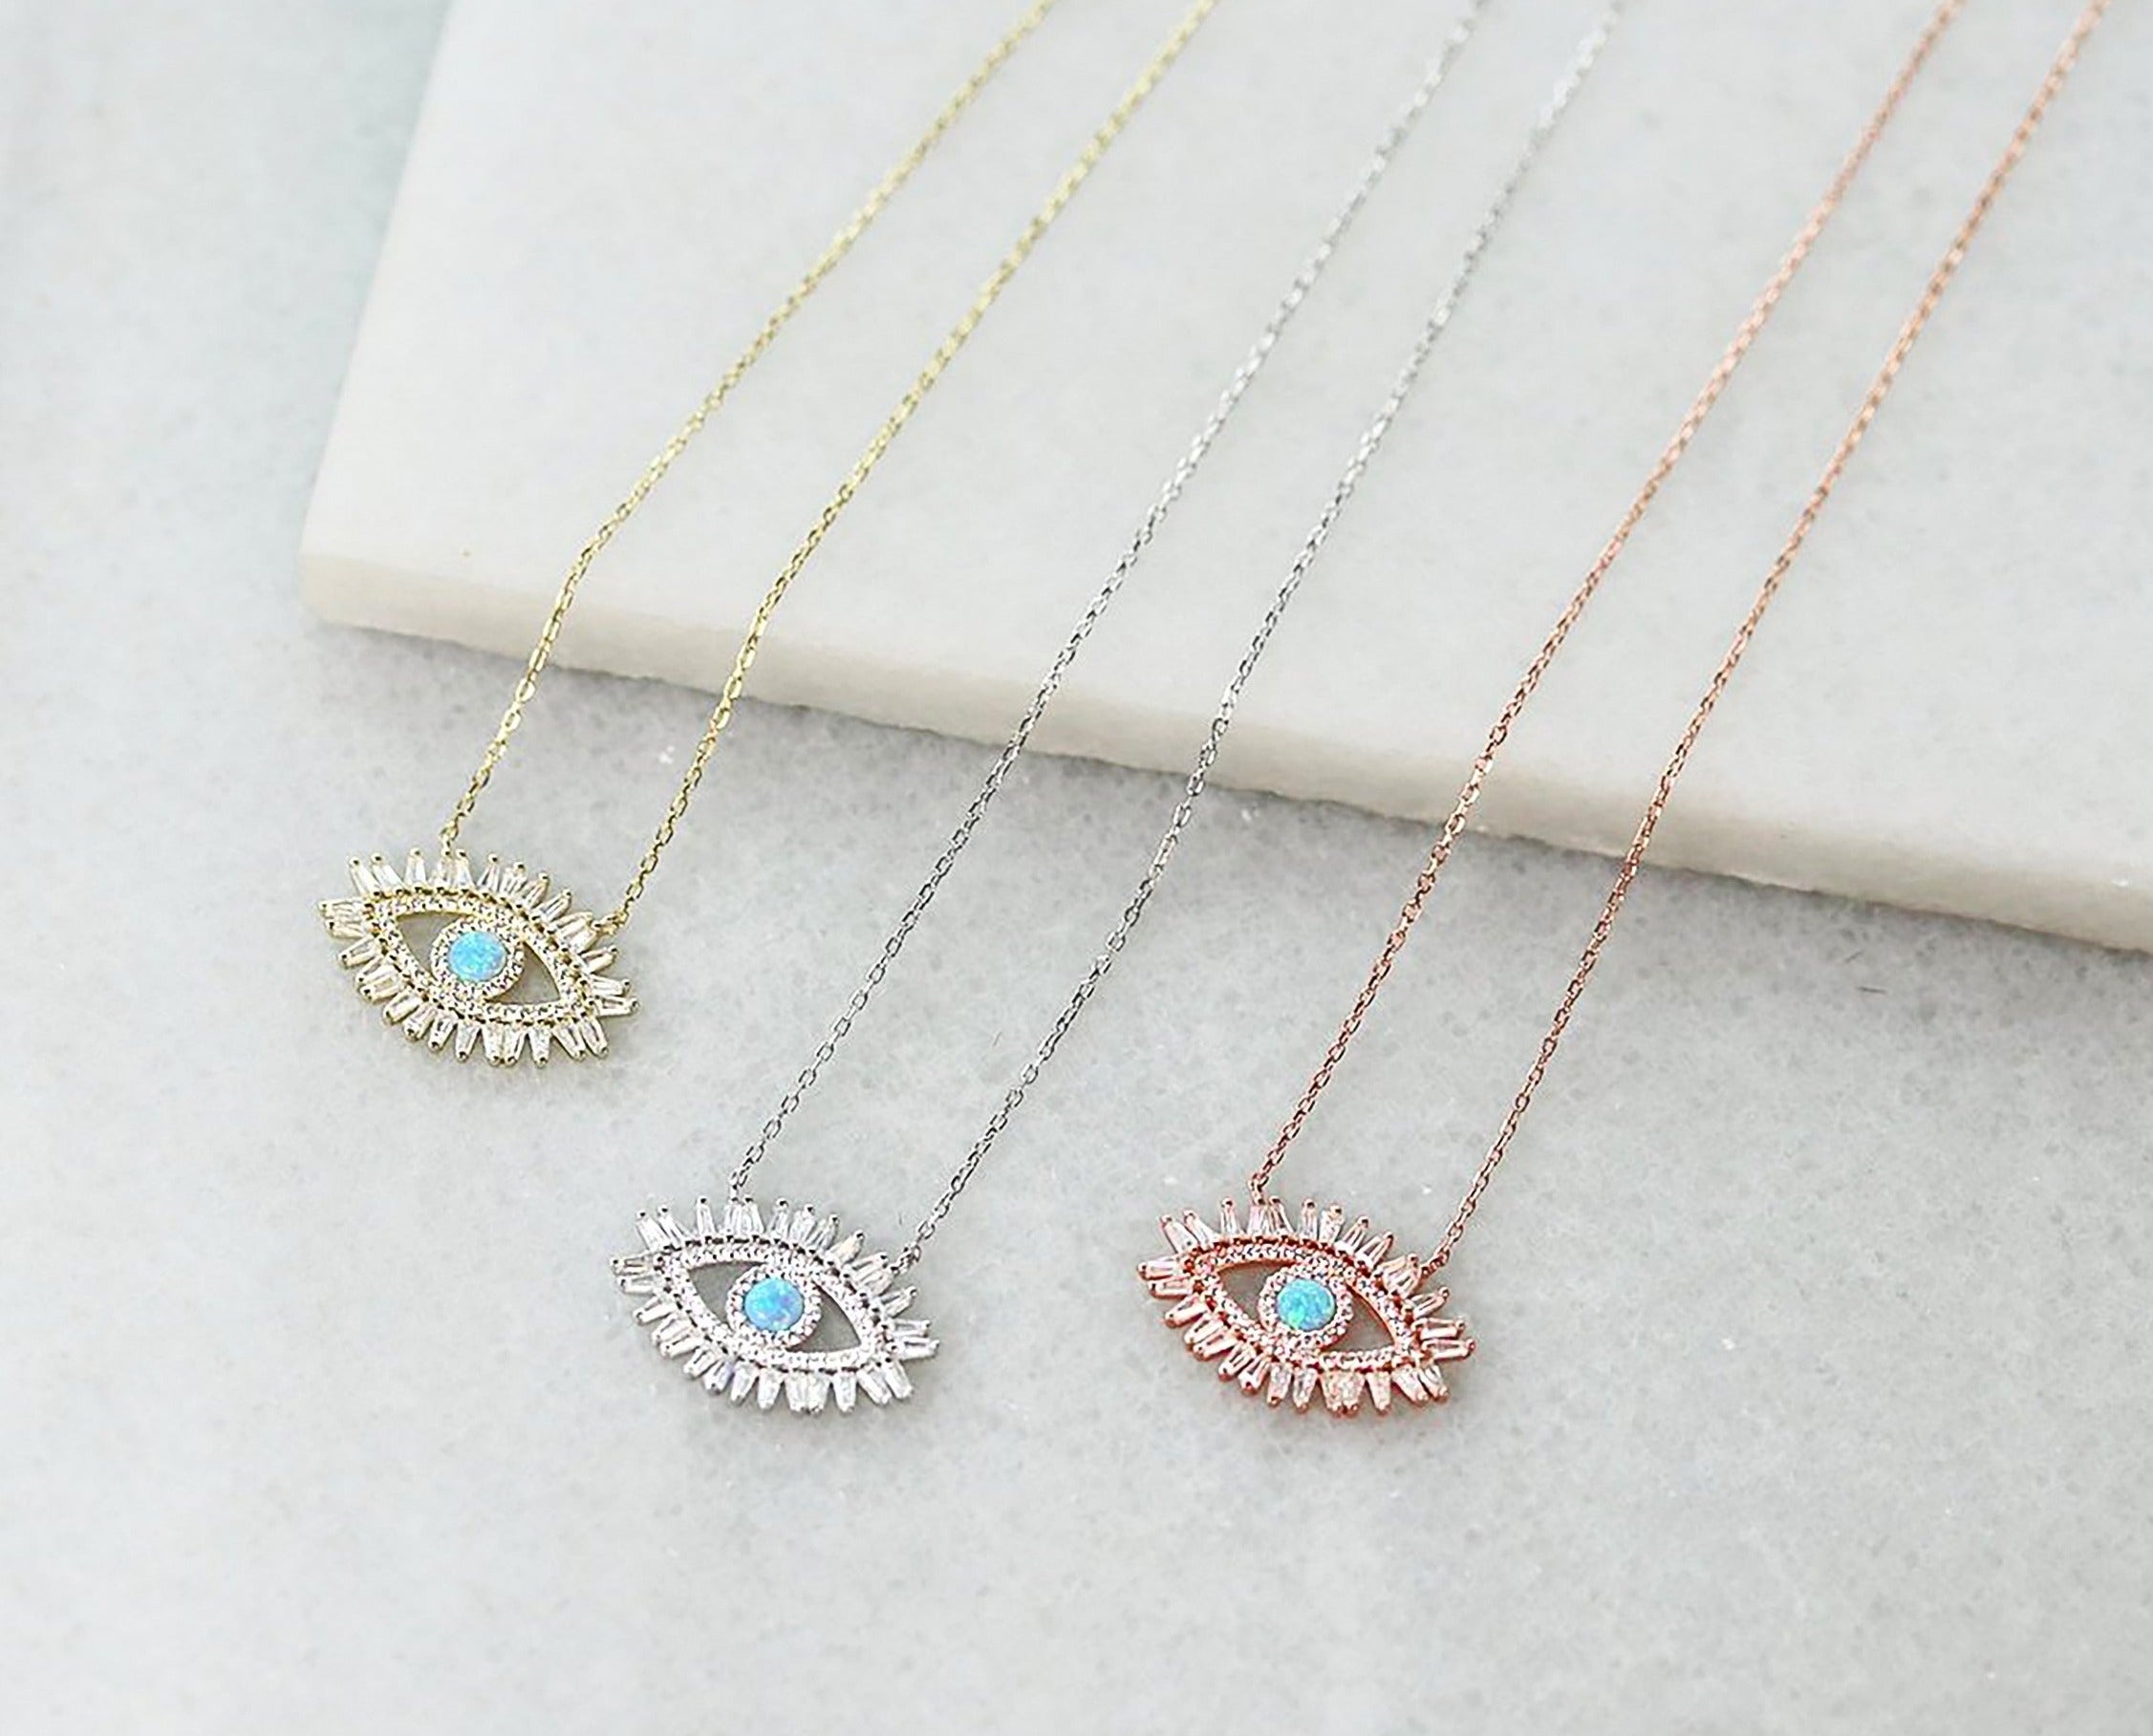 blue opal evil eye necklace cubic zirconia 14k gold plated rose gold 925 sterling silver